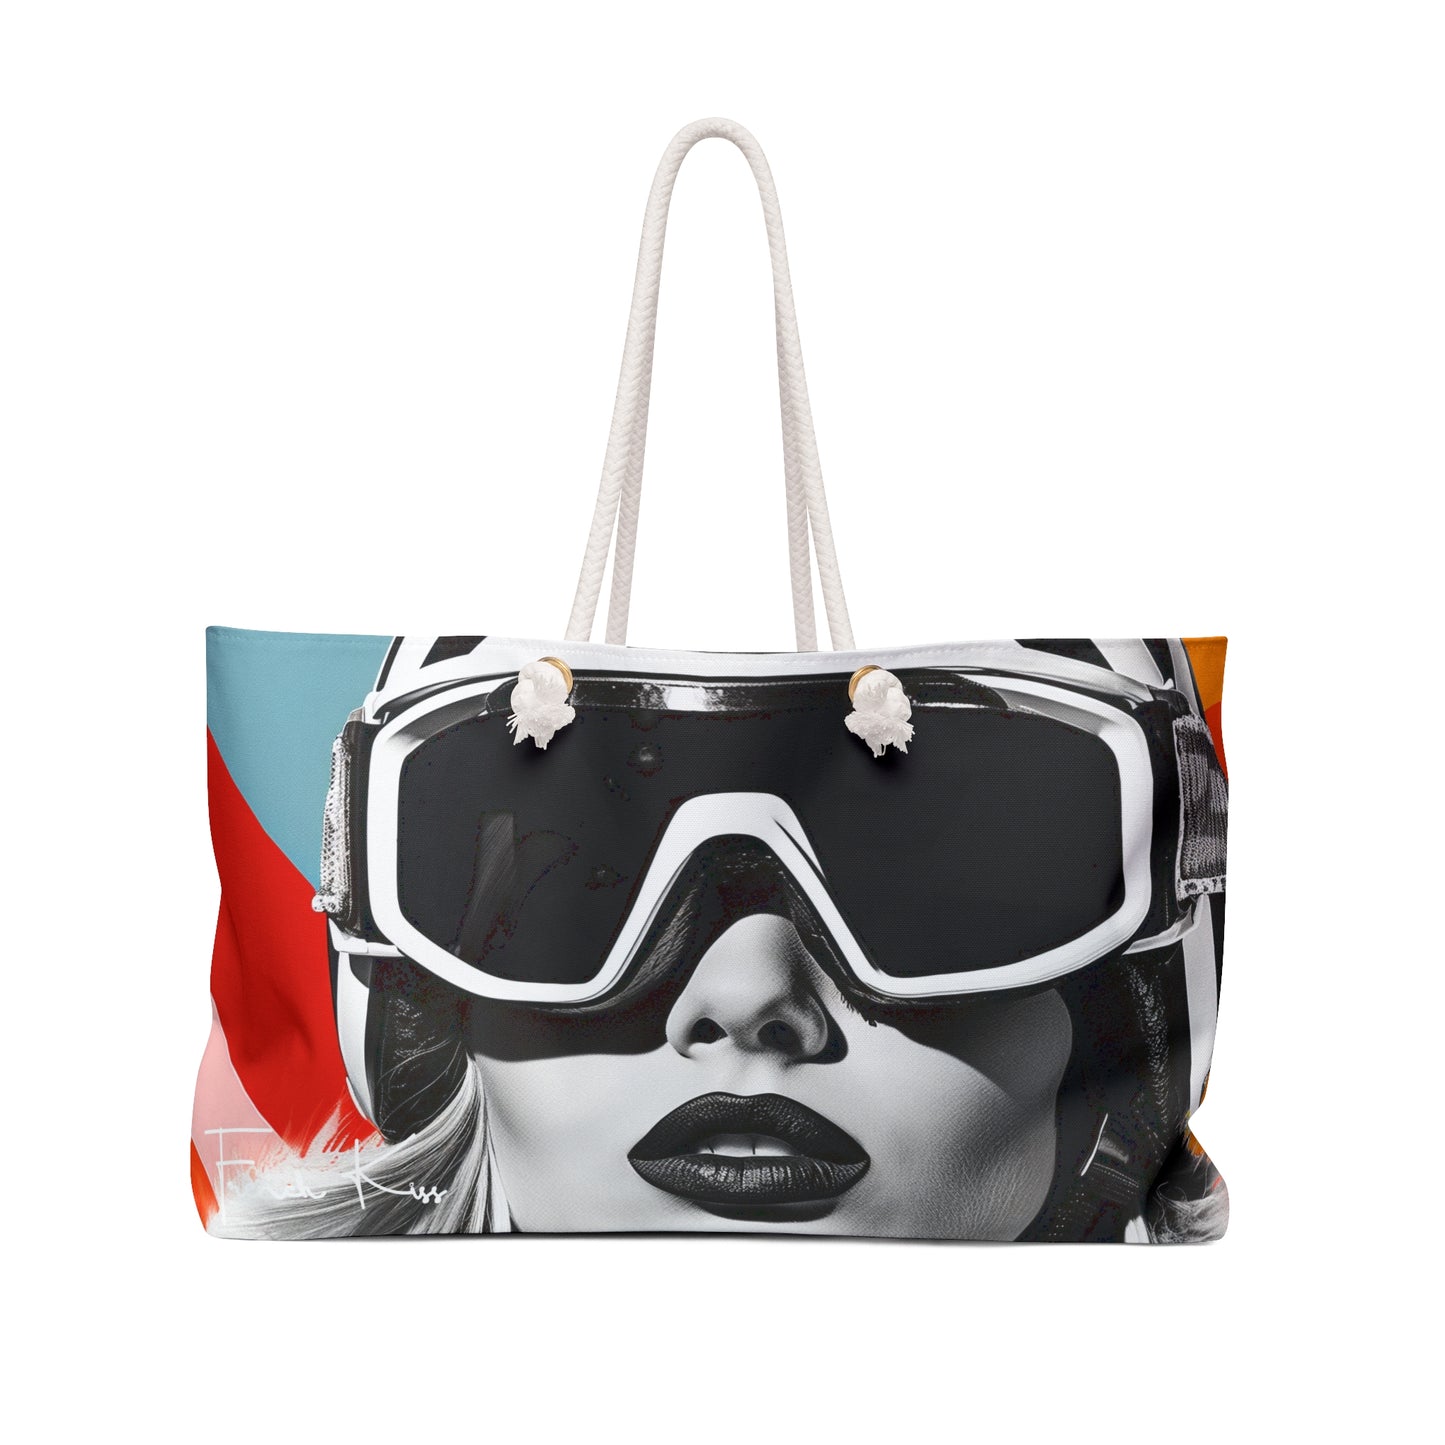 LE SKI Sassy Sexy Chic Weekender Accessory Bag French Kiss Pop Art, Classy, Couture, Travel, Fashion, Beauty gift item